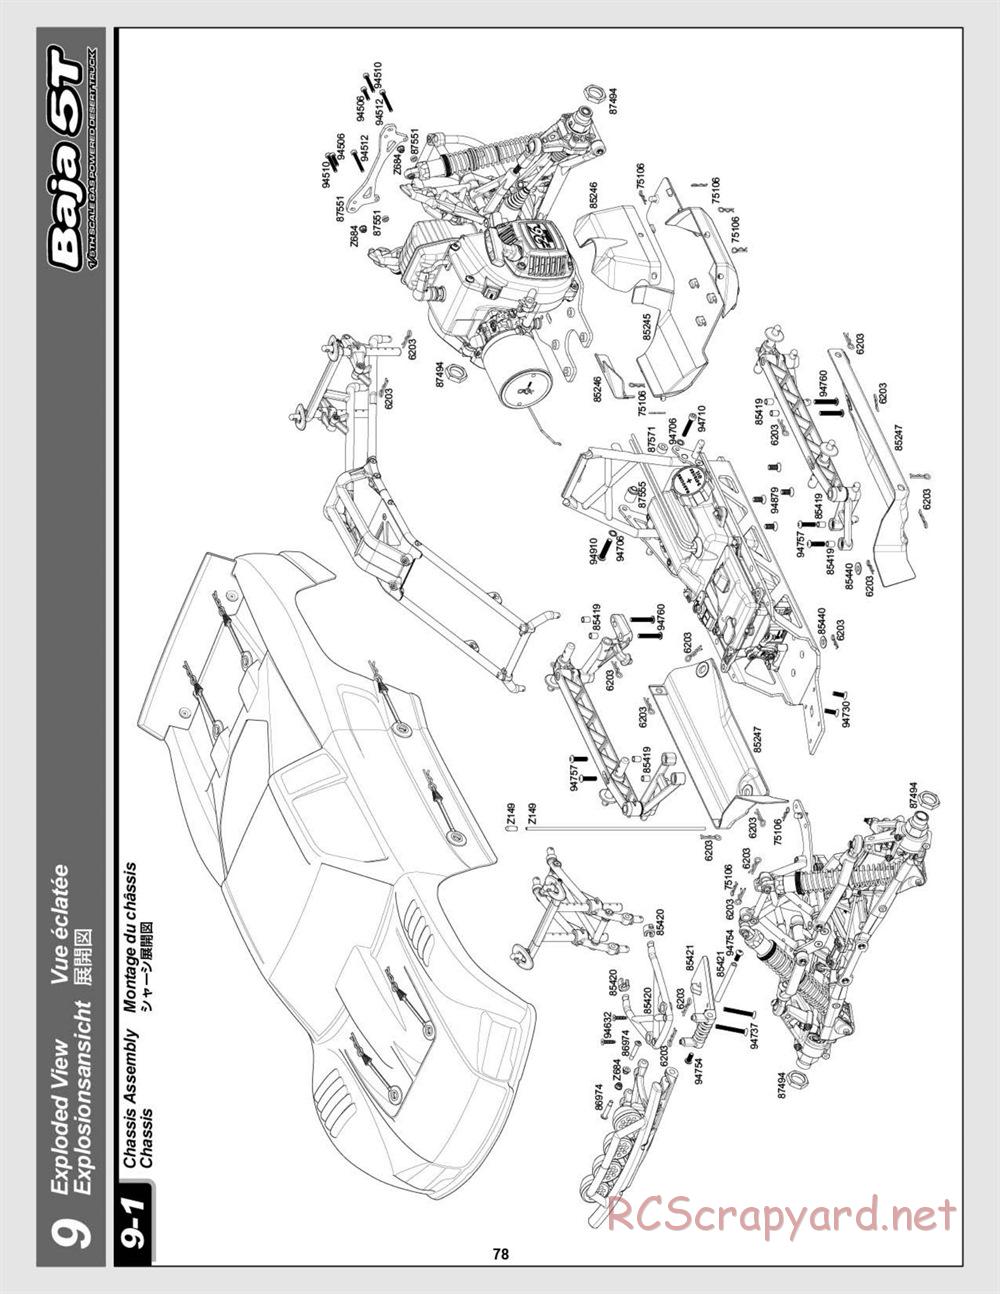 HPI - Baja 5T - Exploded View - Page 78